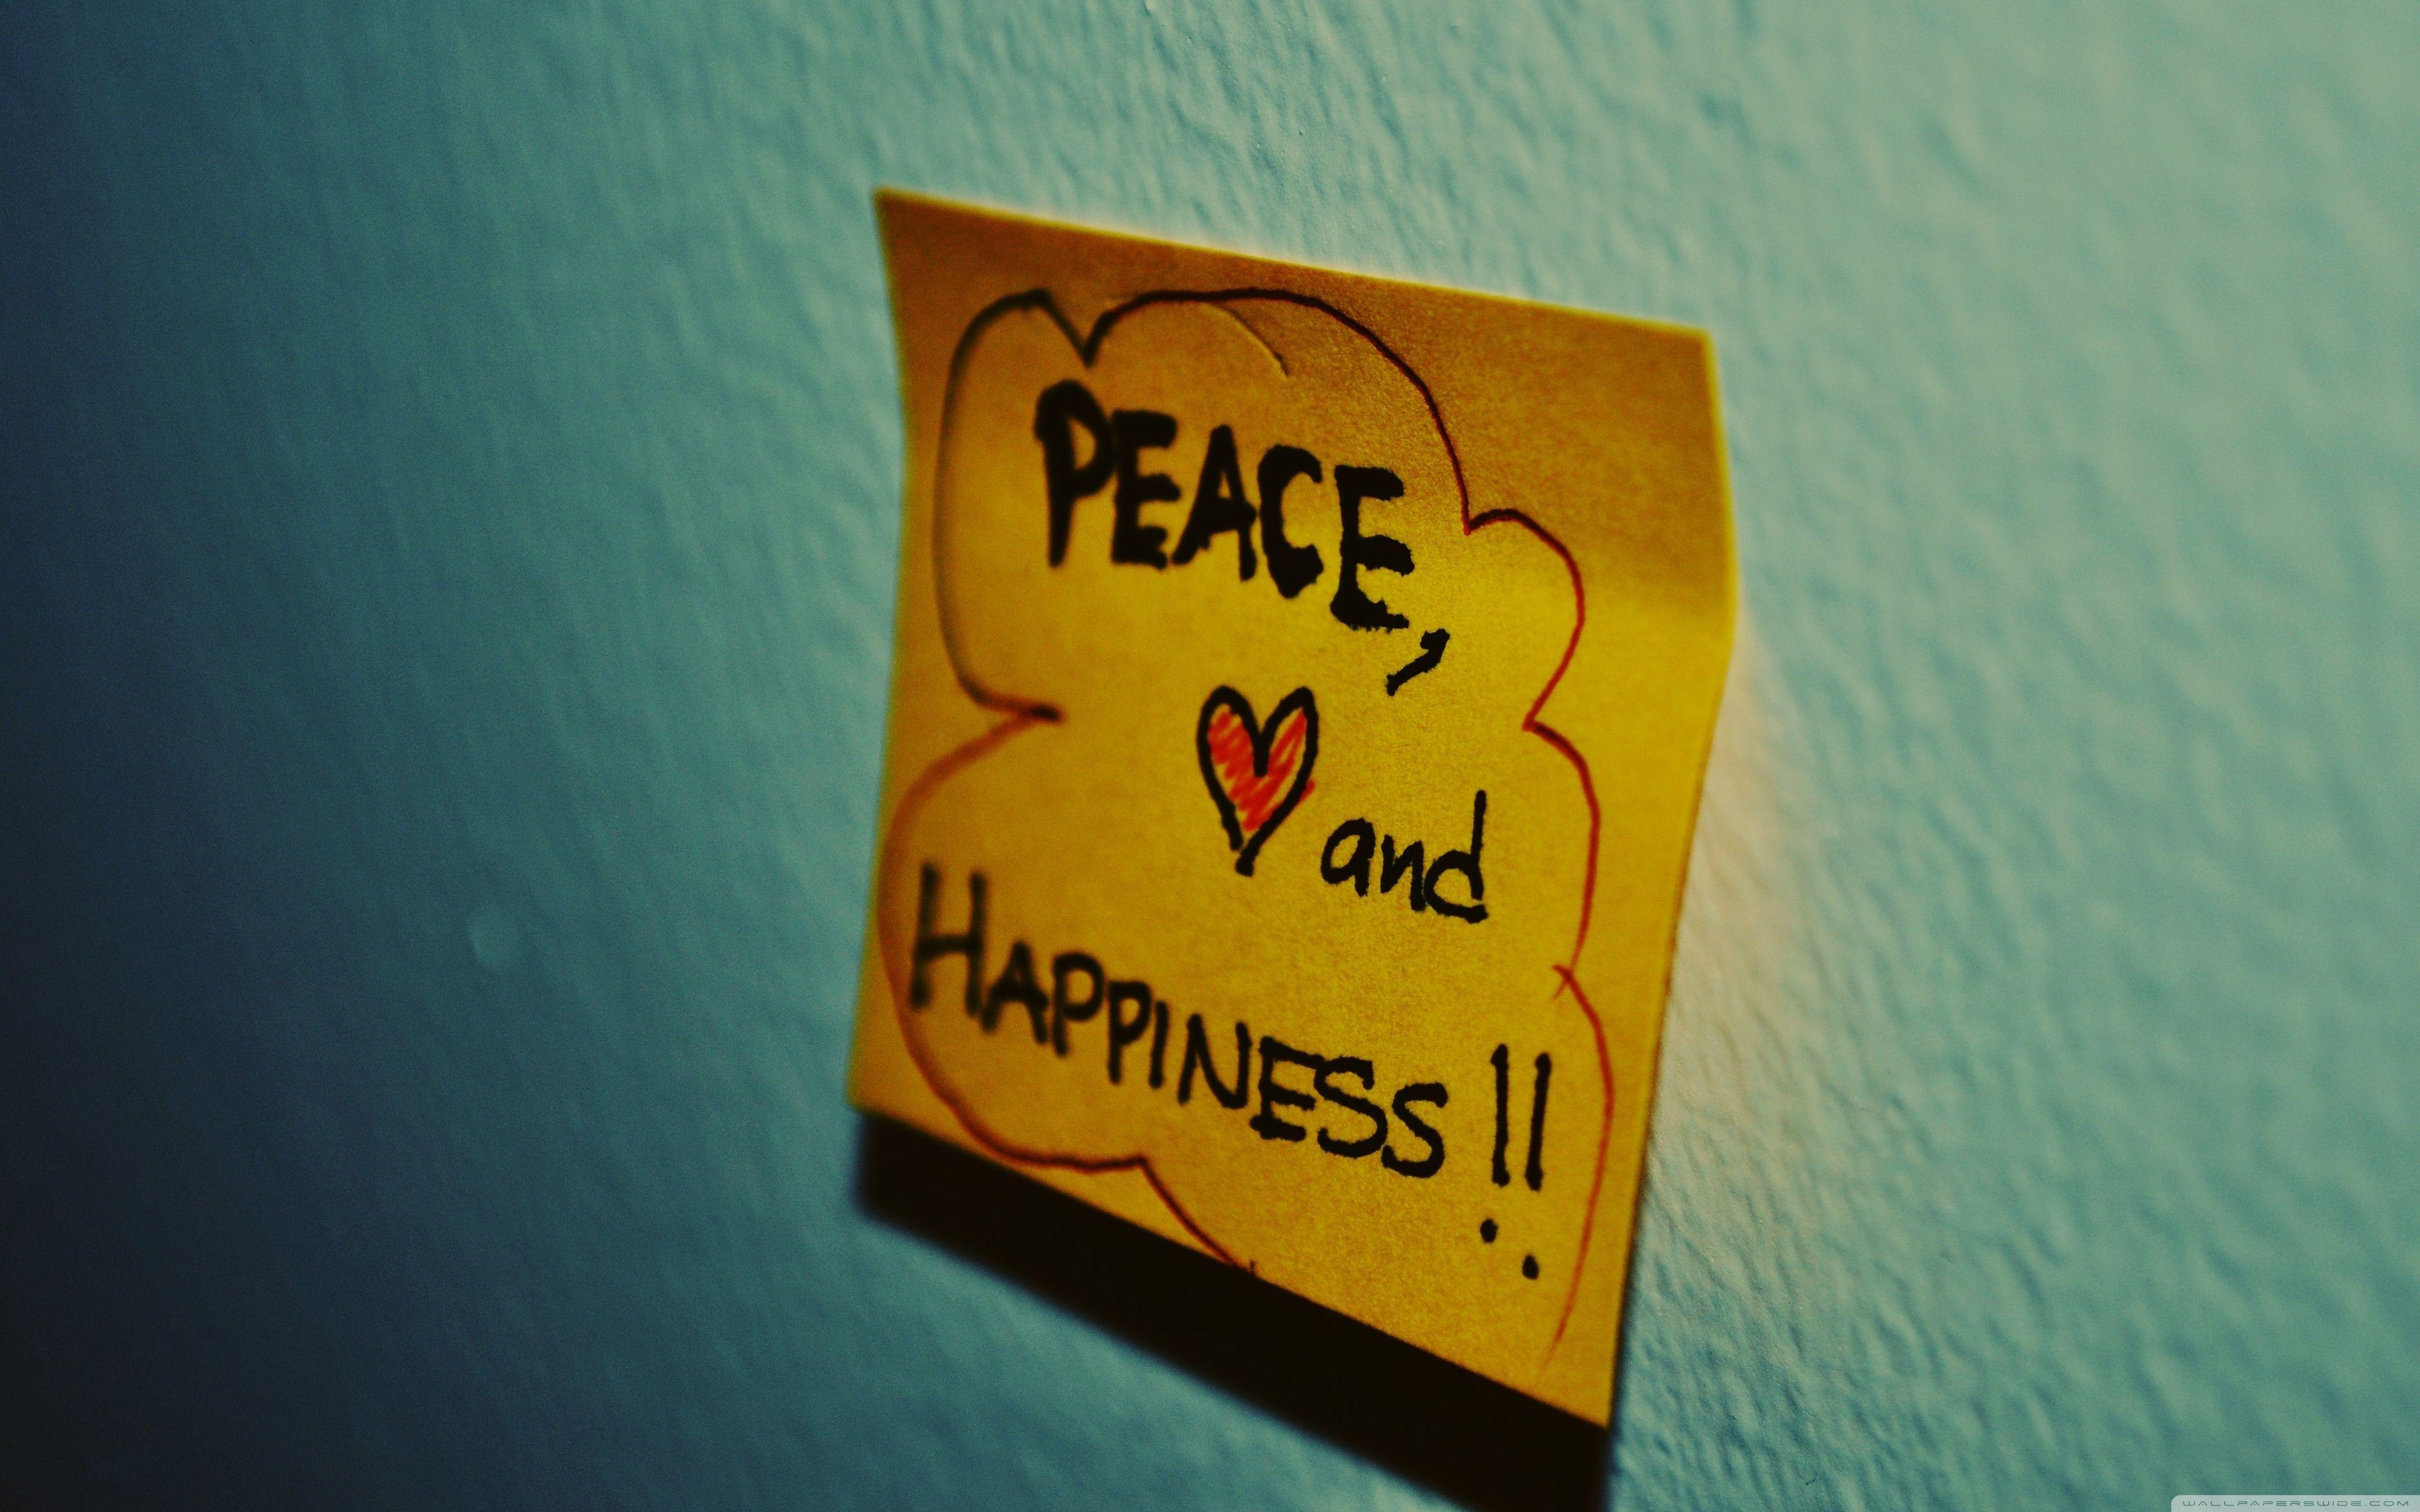 Peace, Love And Happiness HD desktop wallpaper, High Definition